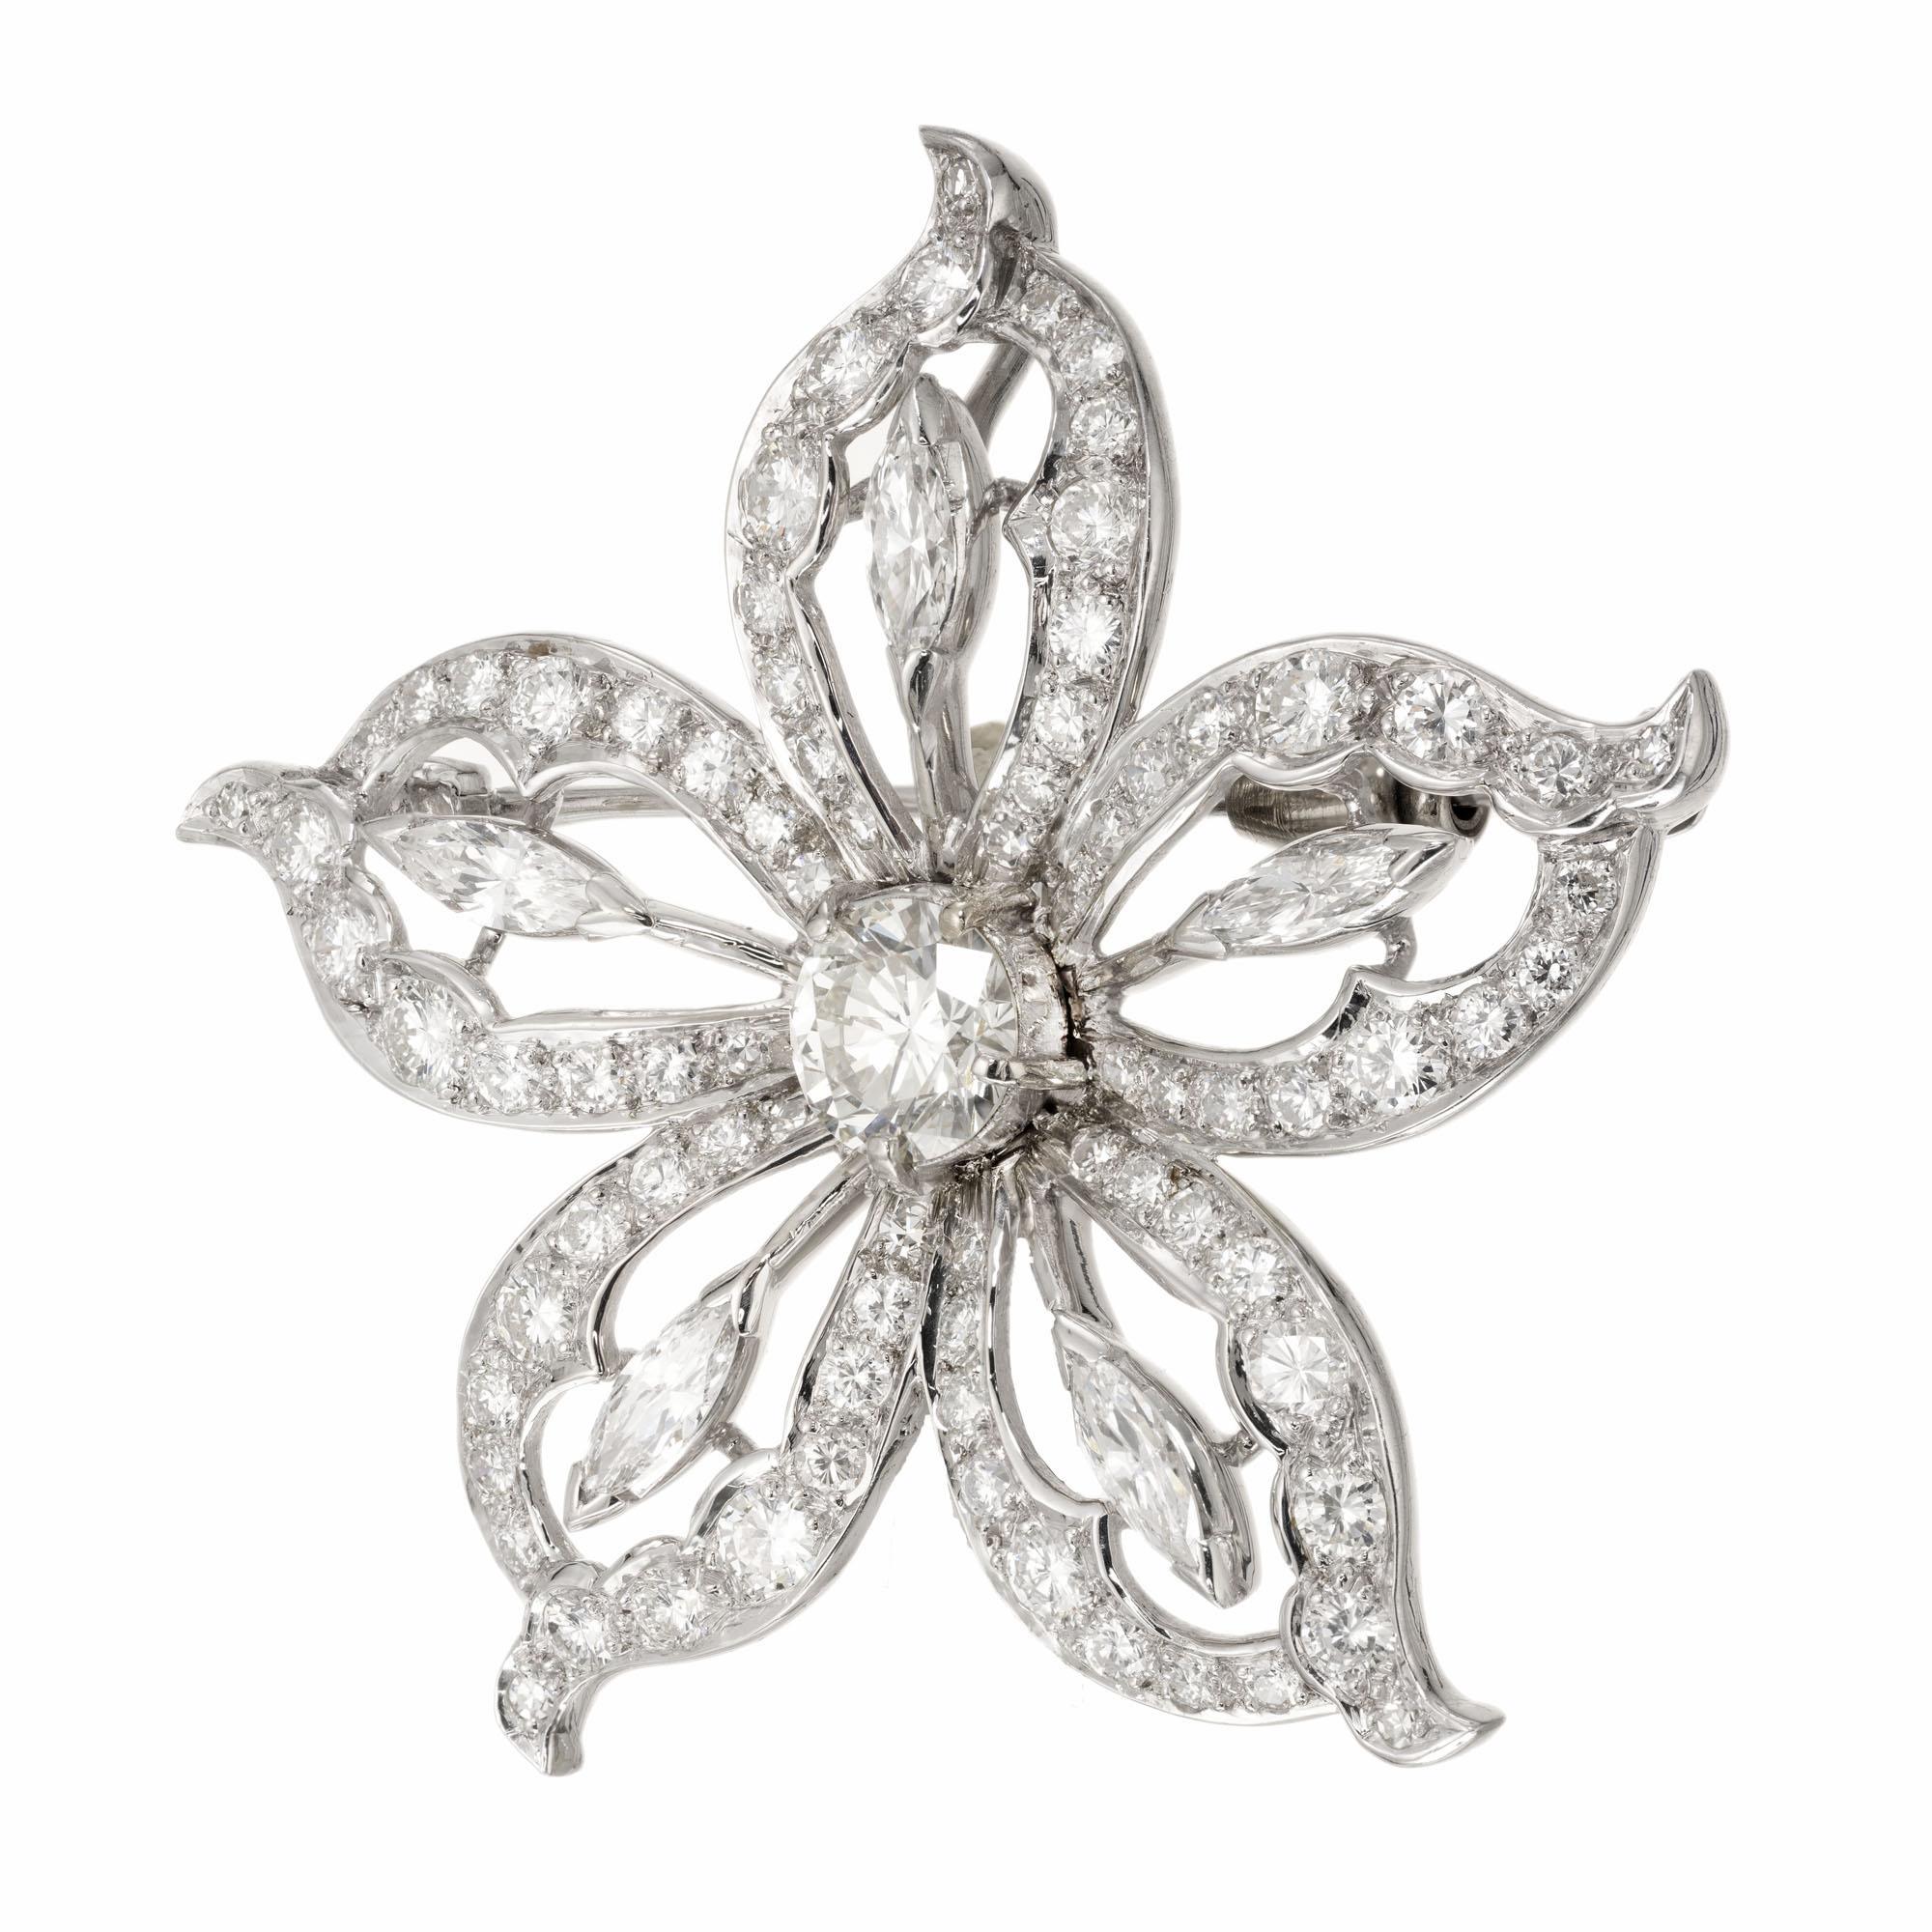 Flower diamond brooch. The EGL certified center 1.20 carat diamond is surrounded by five open petals. Each of the petals has a marquise brilliant cut diamond in the center and is bordered with 16 round cut diamonds varying in sizes. Can be worn as a